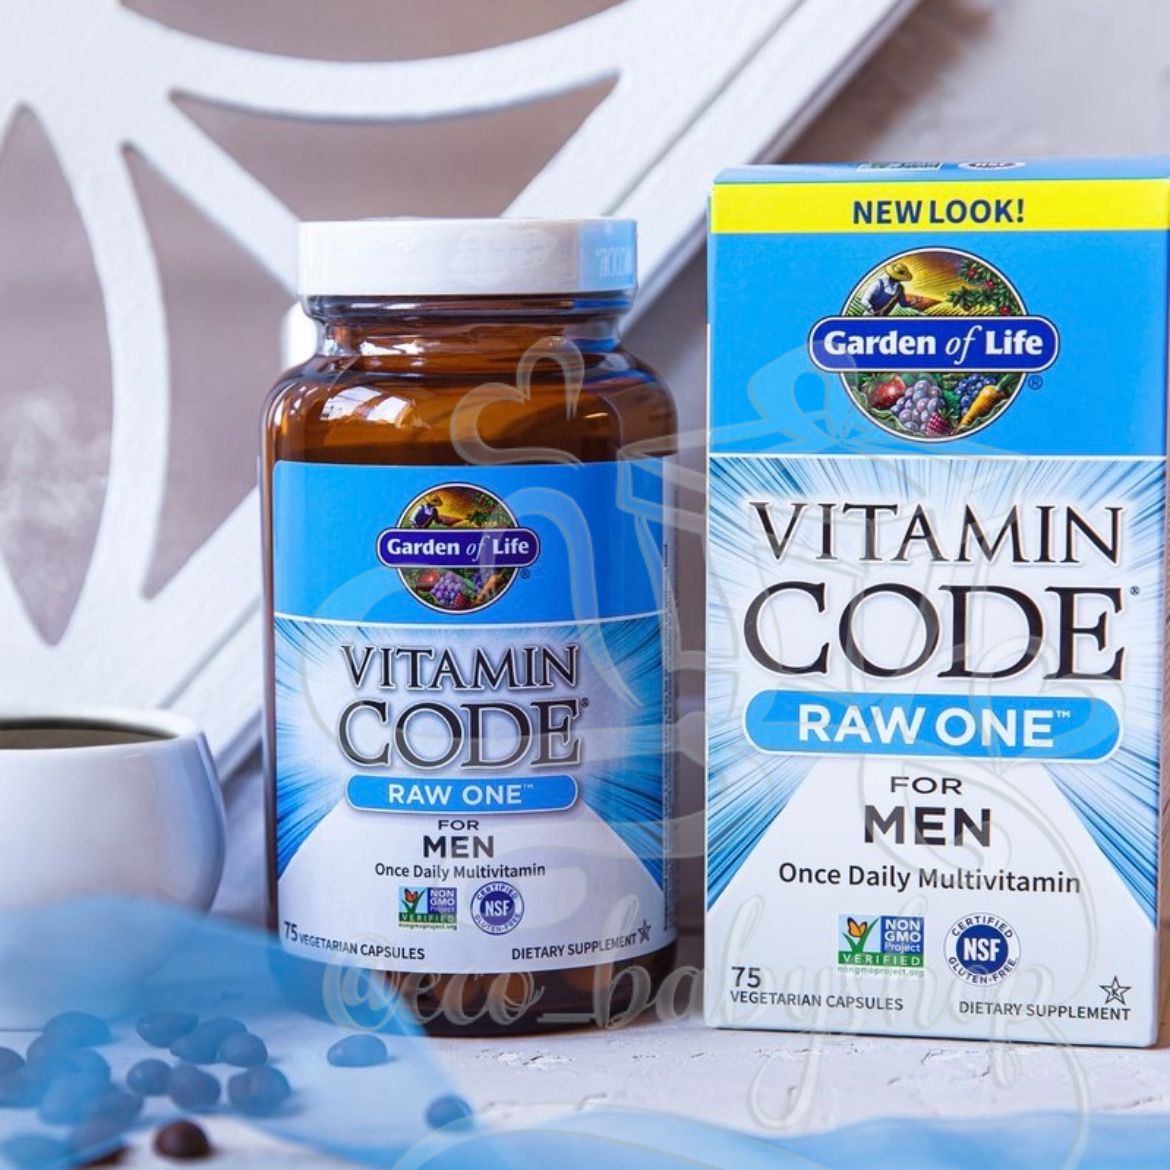 Vitamin Code® Raw One for Men